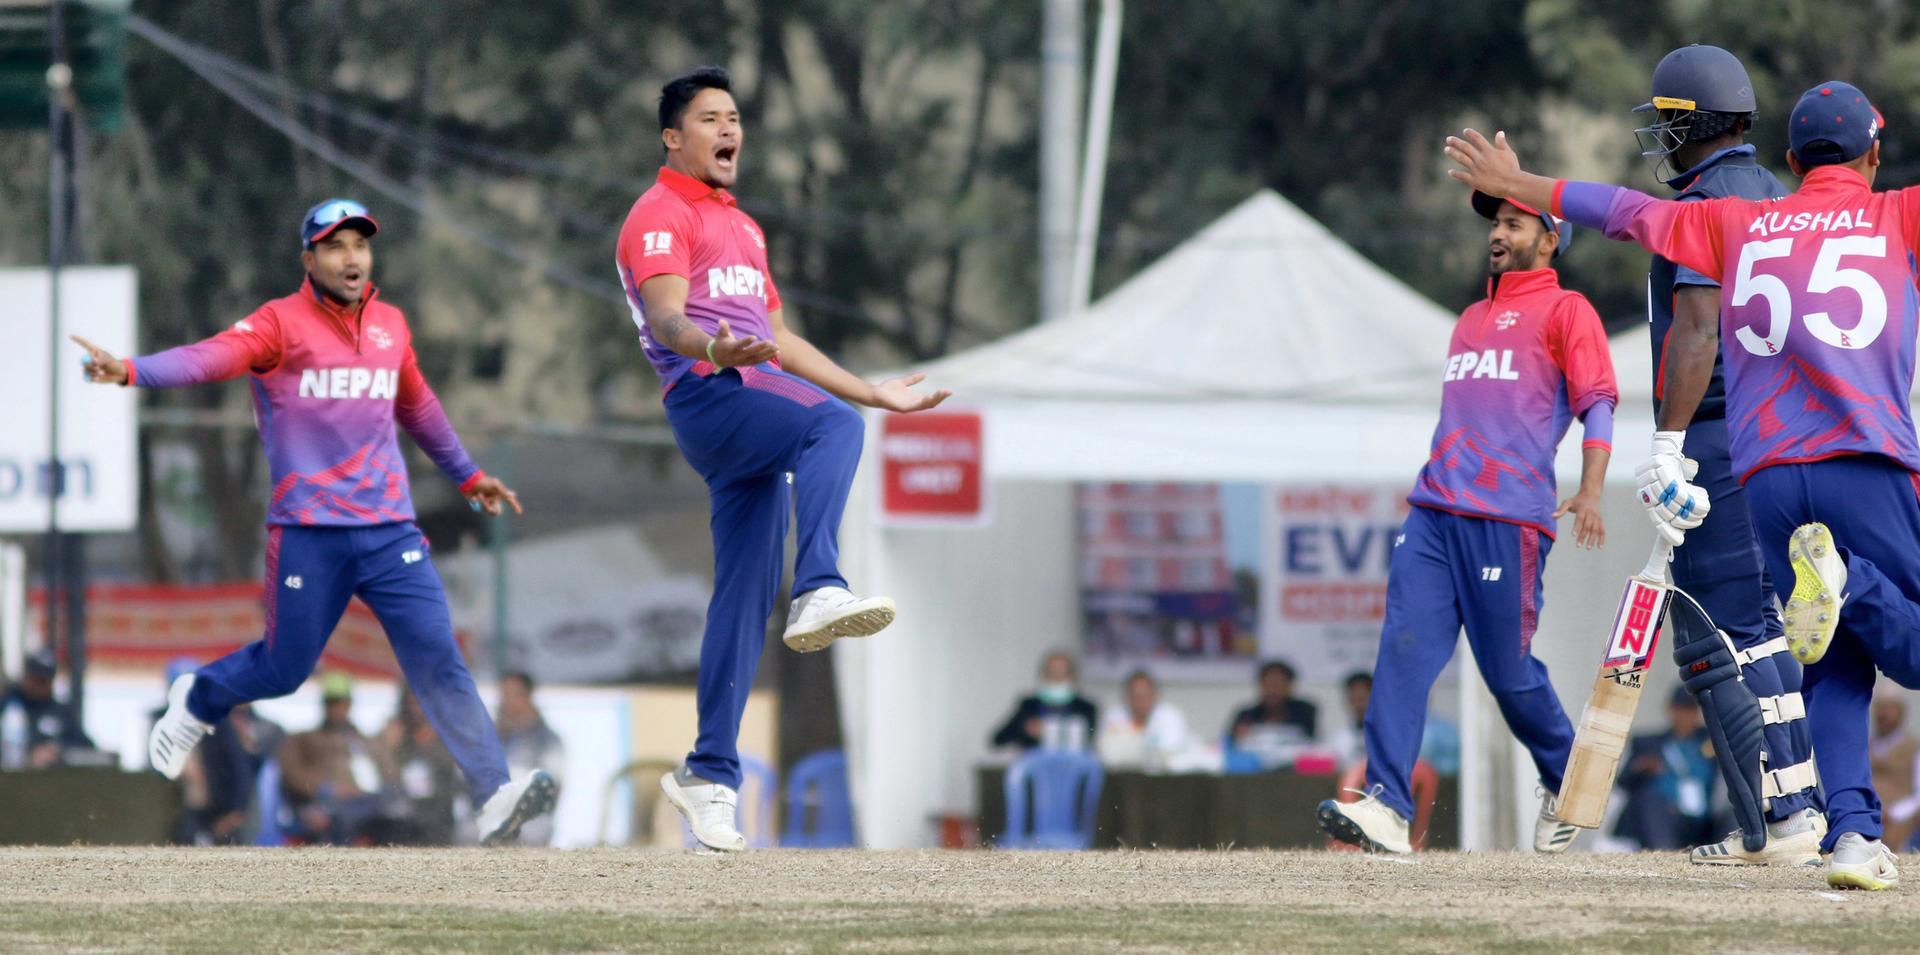 nepal-playing-against-us-in-icc-mens-world-cup-league-2